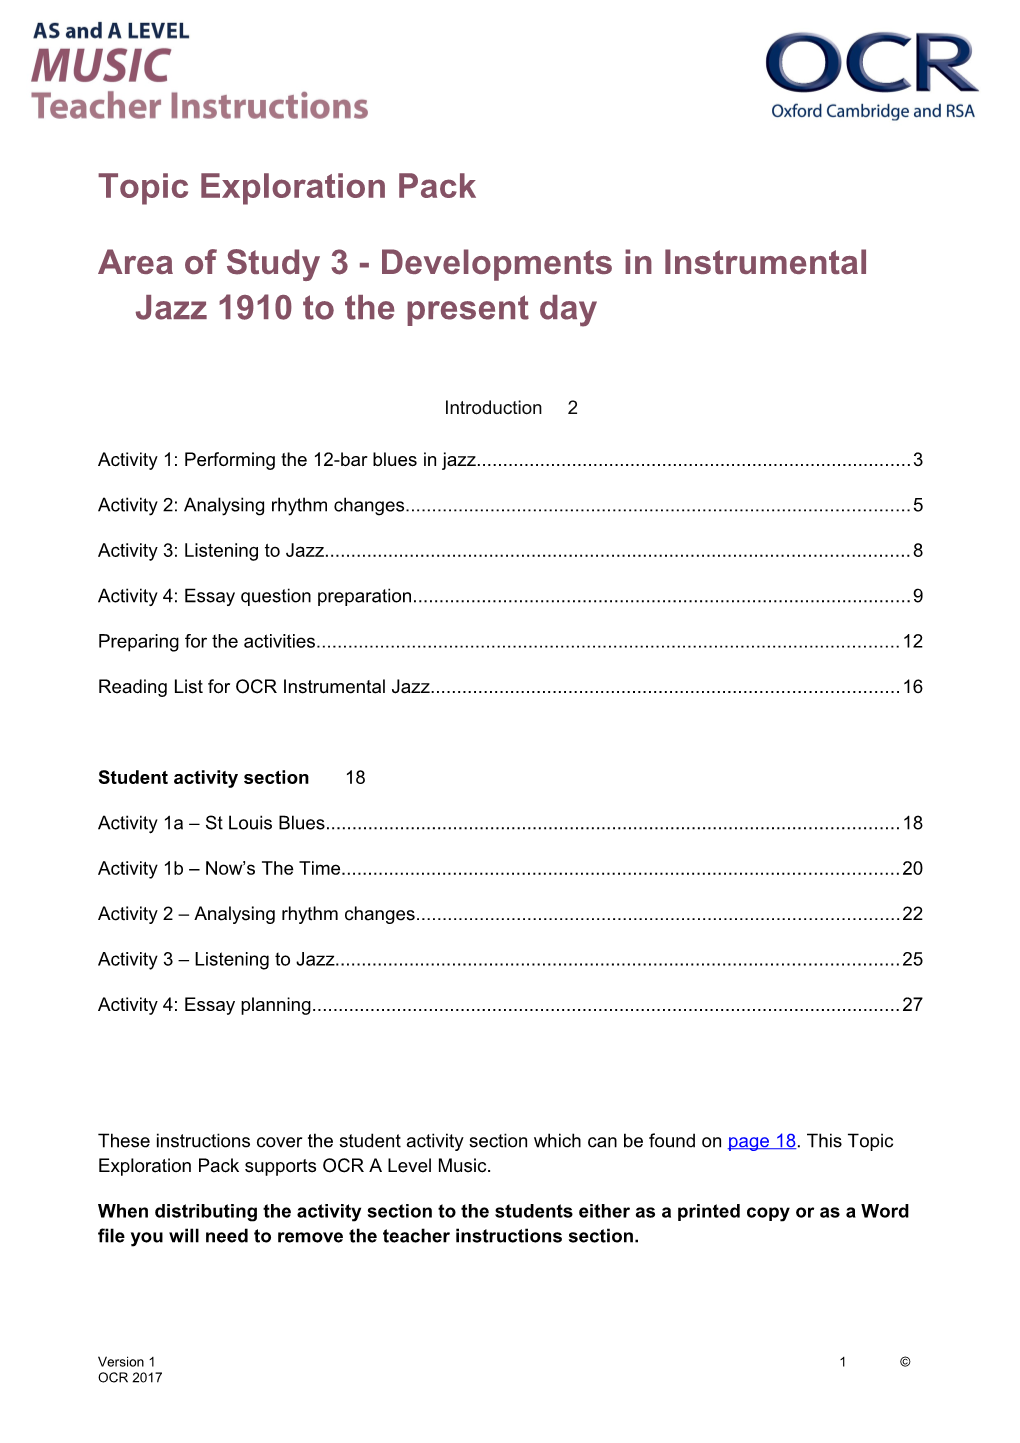 OCR a Level Music TEP - Area of Study 3 - Developments in Instrumental Jazz 1910 to The